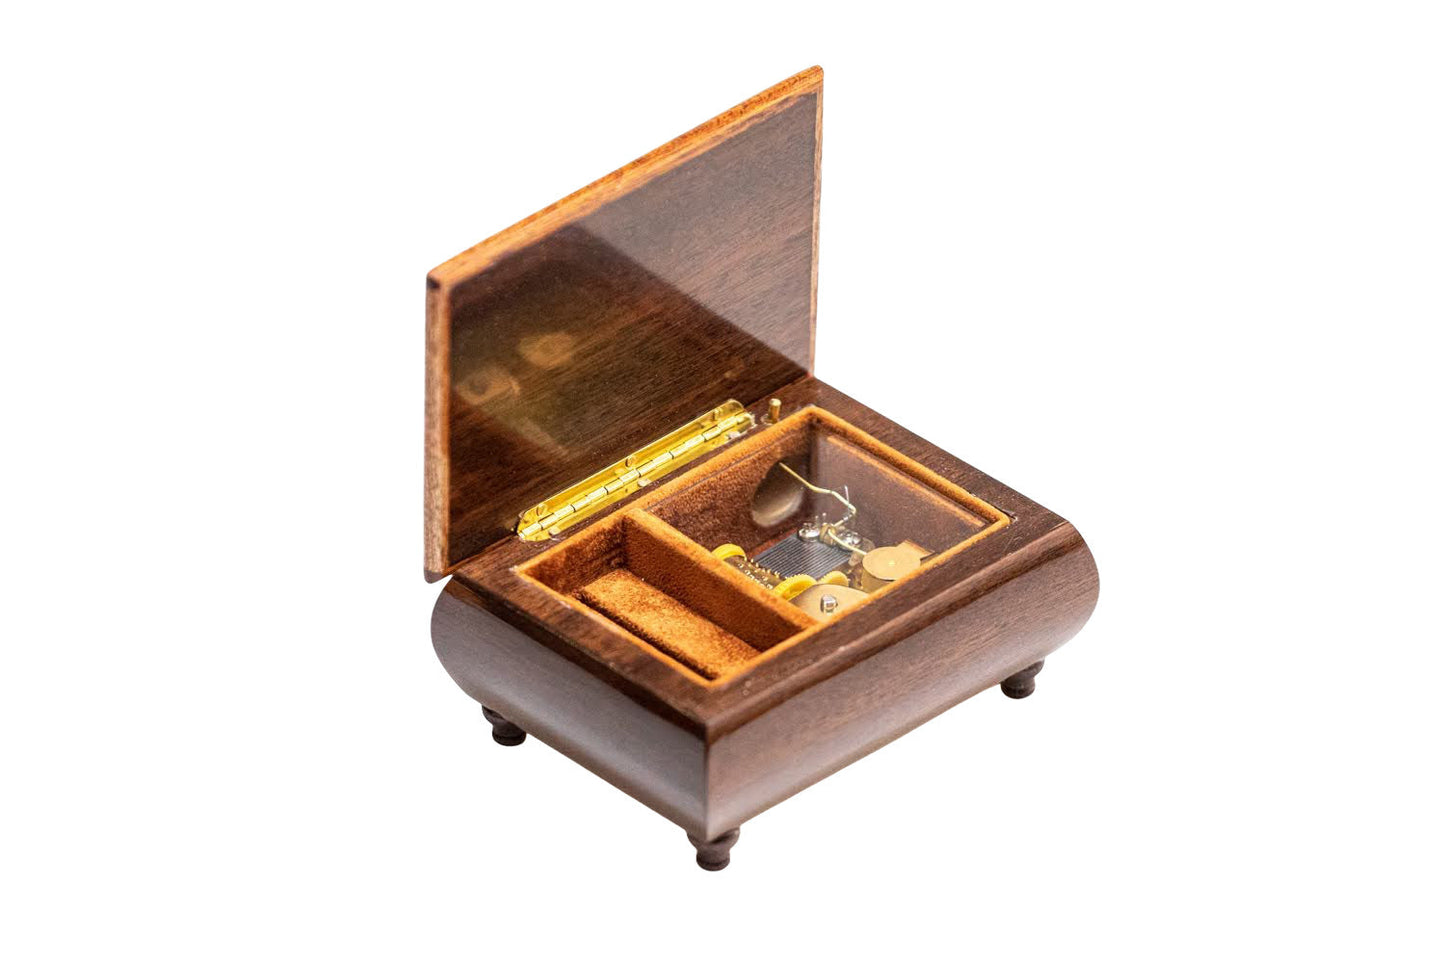 Sorrento Music Box Brown Floral with boarder in Glossy finish